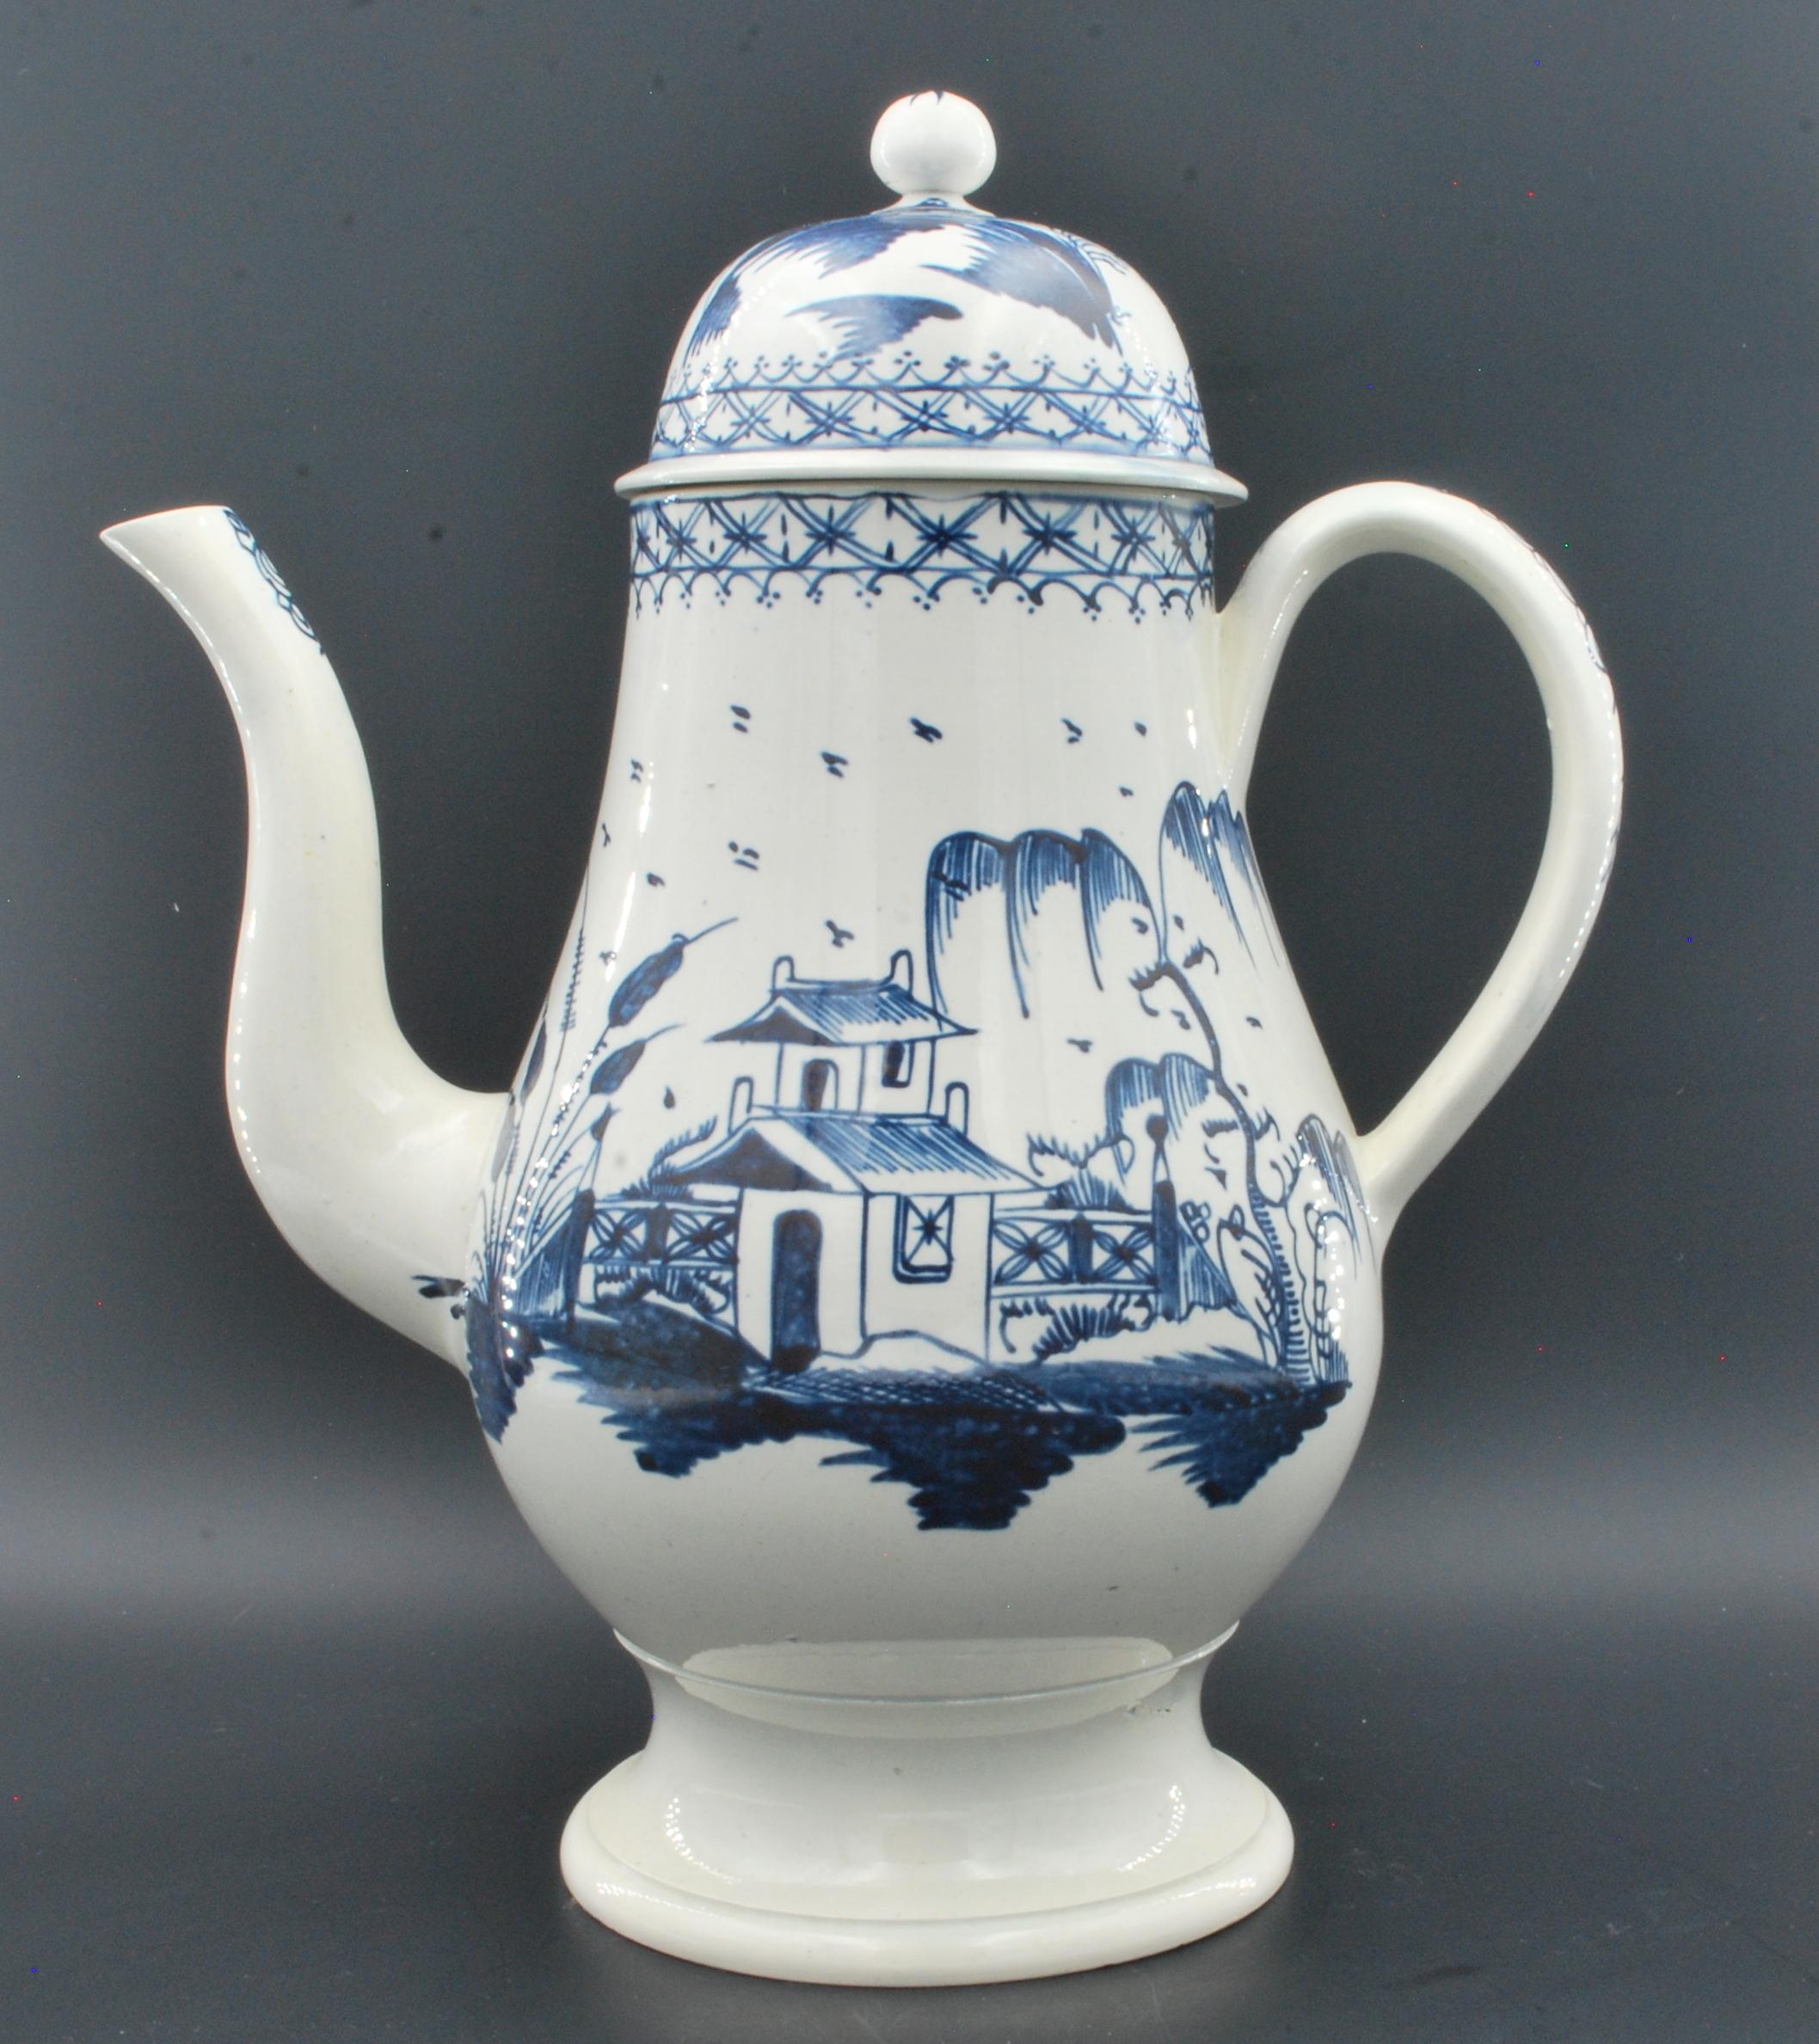 A fine and large - enormous - coffee or chocolate pot in pearlware, with  “House & Fence” decoration, in imitation of a Chinese original.

It is thought that these oversixed pots were intended as decoration, or to be put in the window of